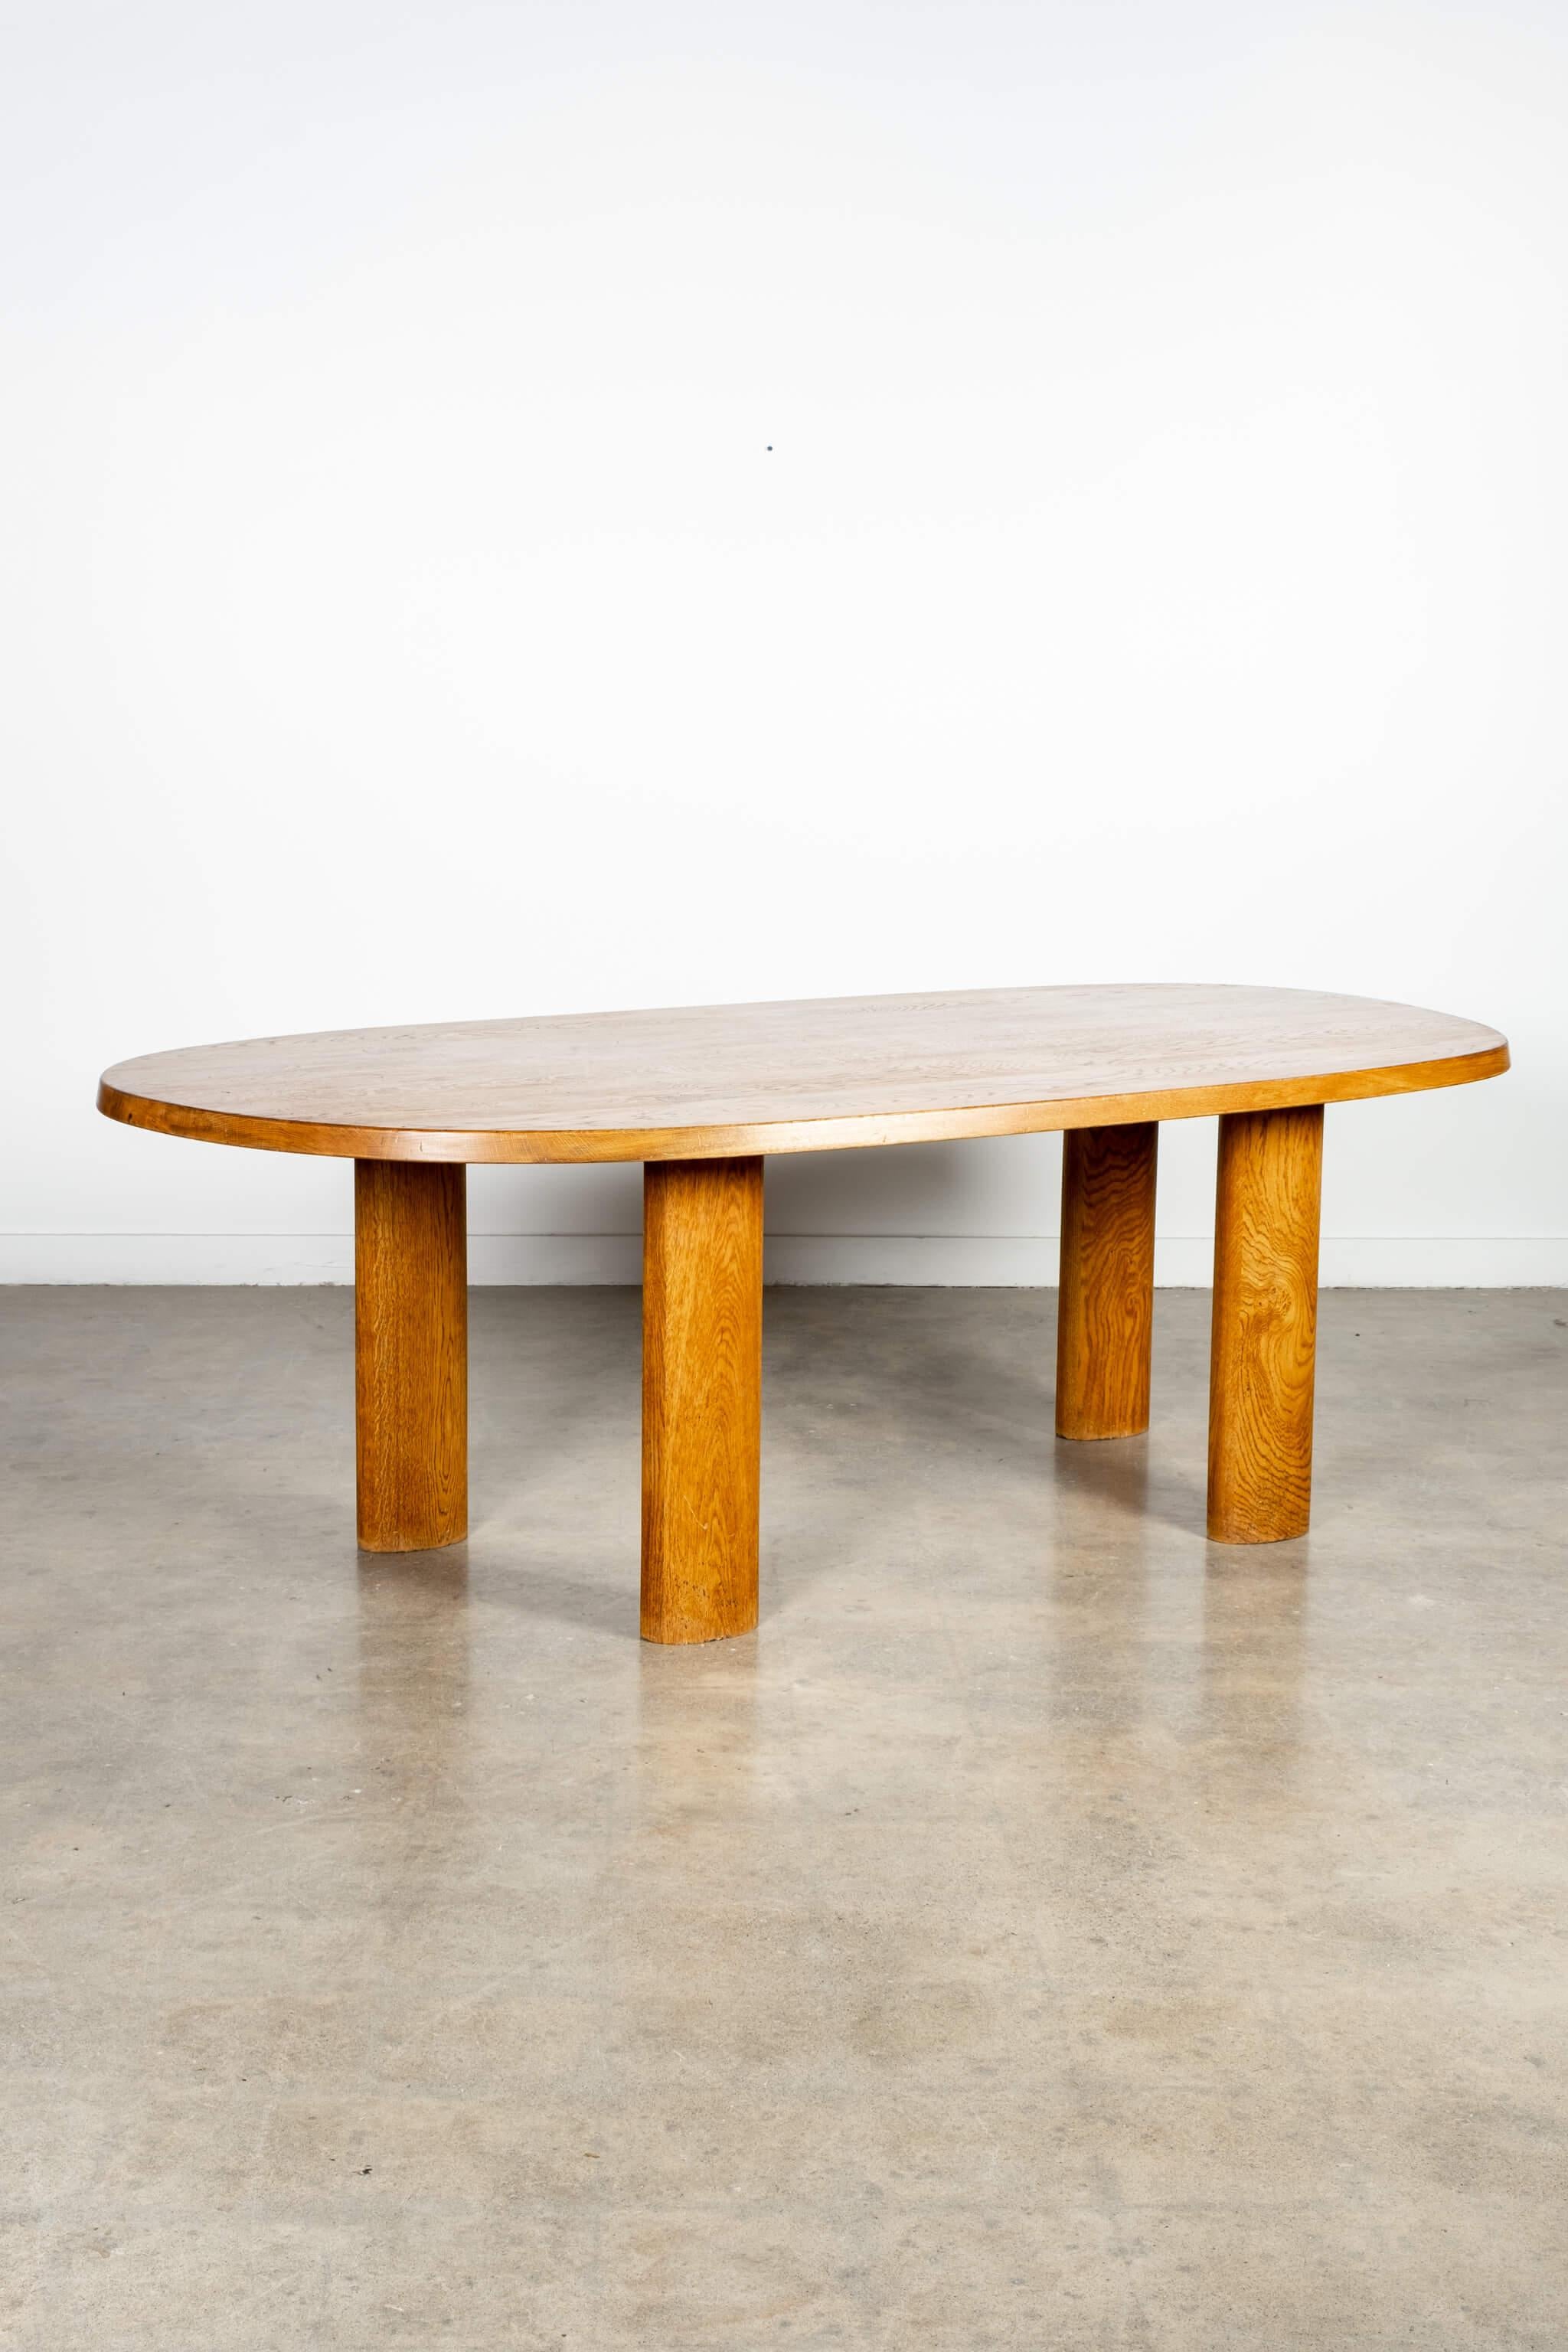 A contemporary to Charlotte Perriand's 'En Forme Libre' wood table, this 1950s dining table is all rounded edges and asymmetrical lines - with a modest organic shape and 4 cylindrical oval legs of solid wood. A testament to 1950s French furniture